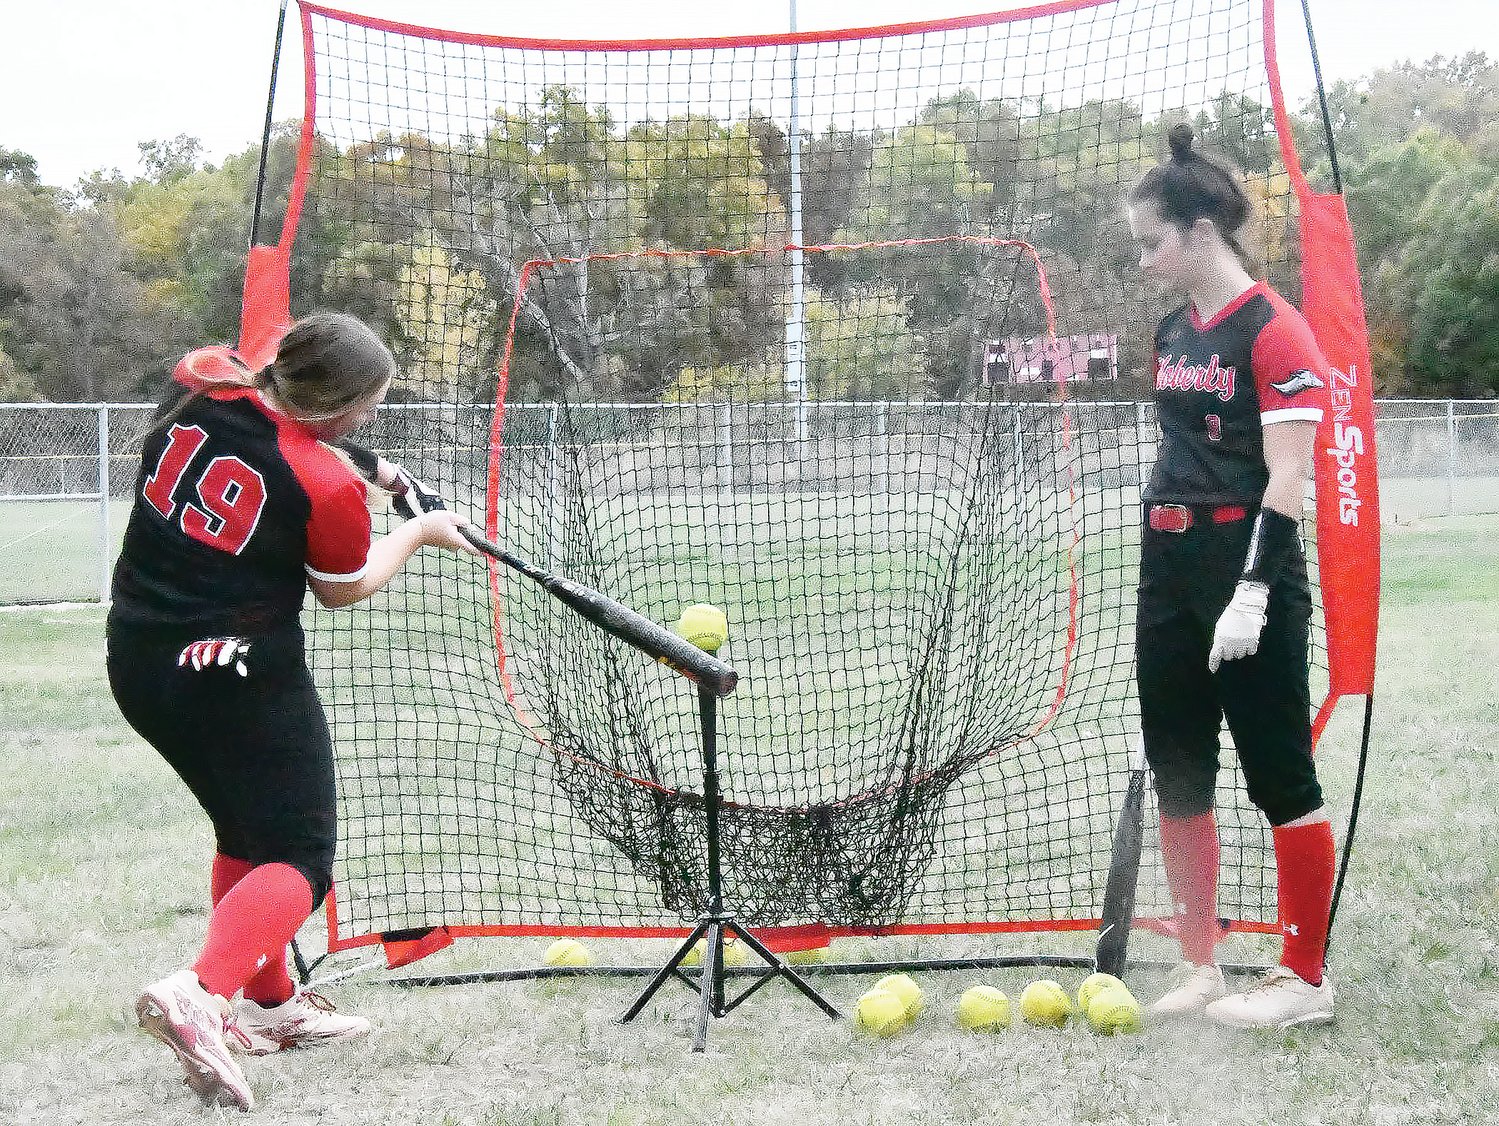 Moberly Area Community College's Abby Reed works on her swing in between games.